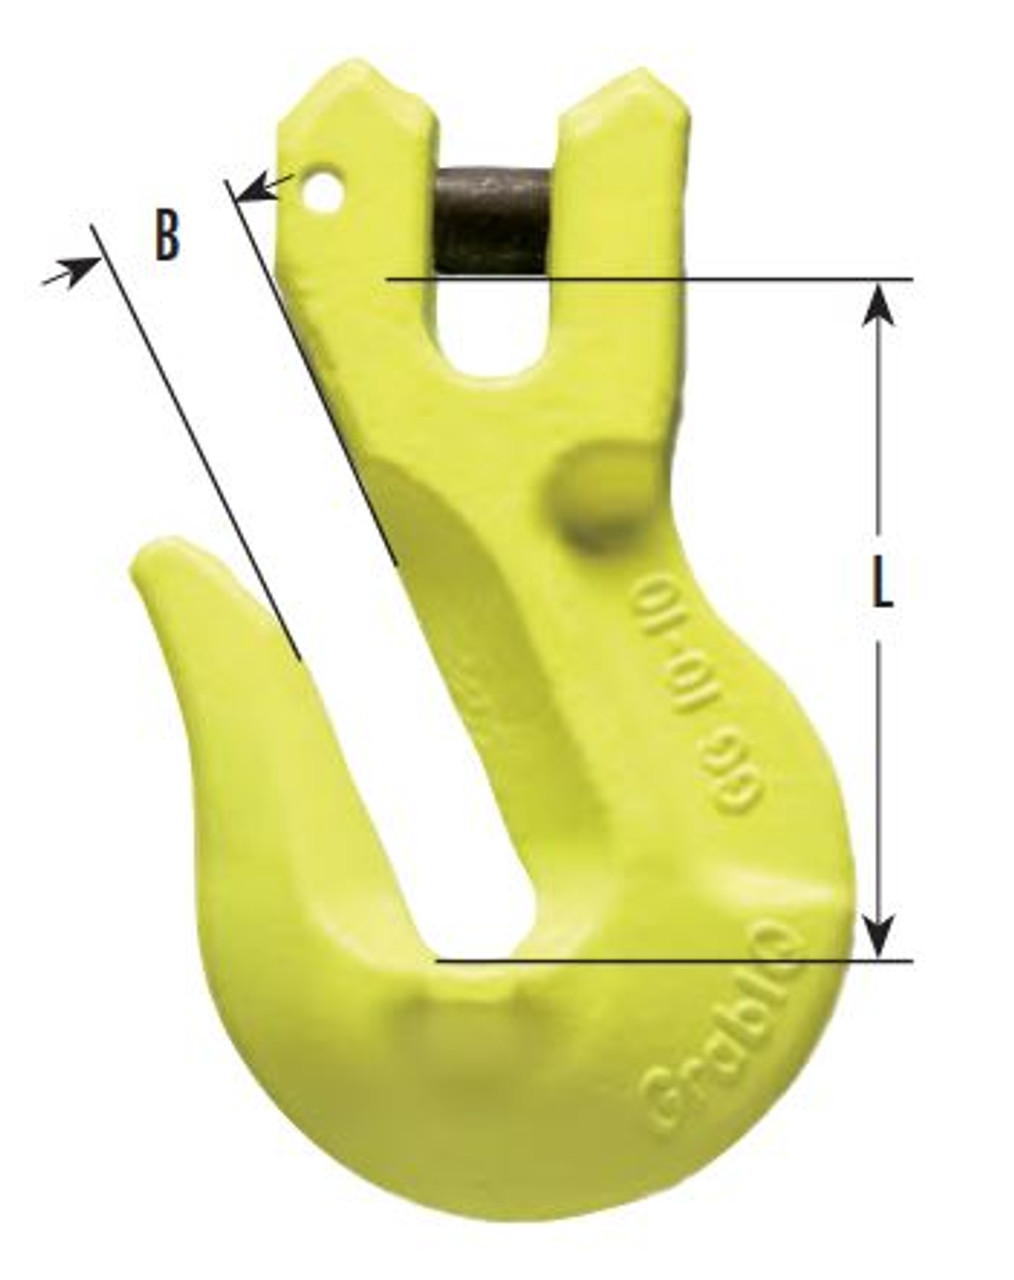 Gunnebo Grade 100 Clevis Grab Hook (GG) - Olsen Chain & Cable